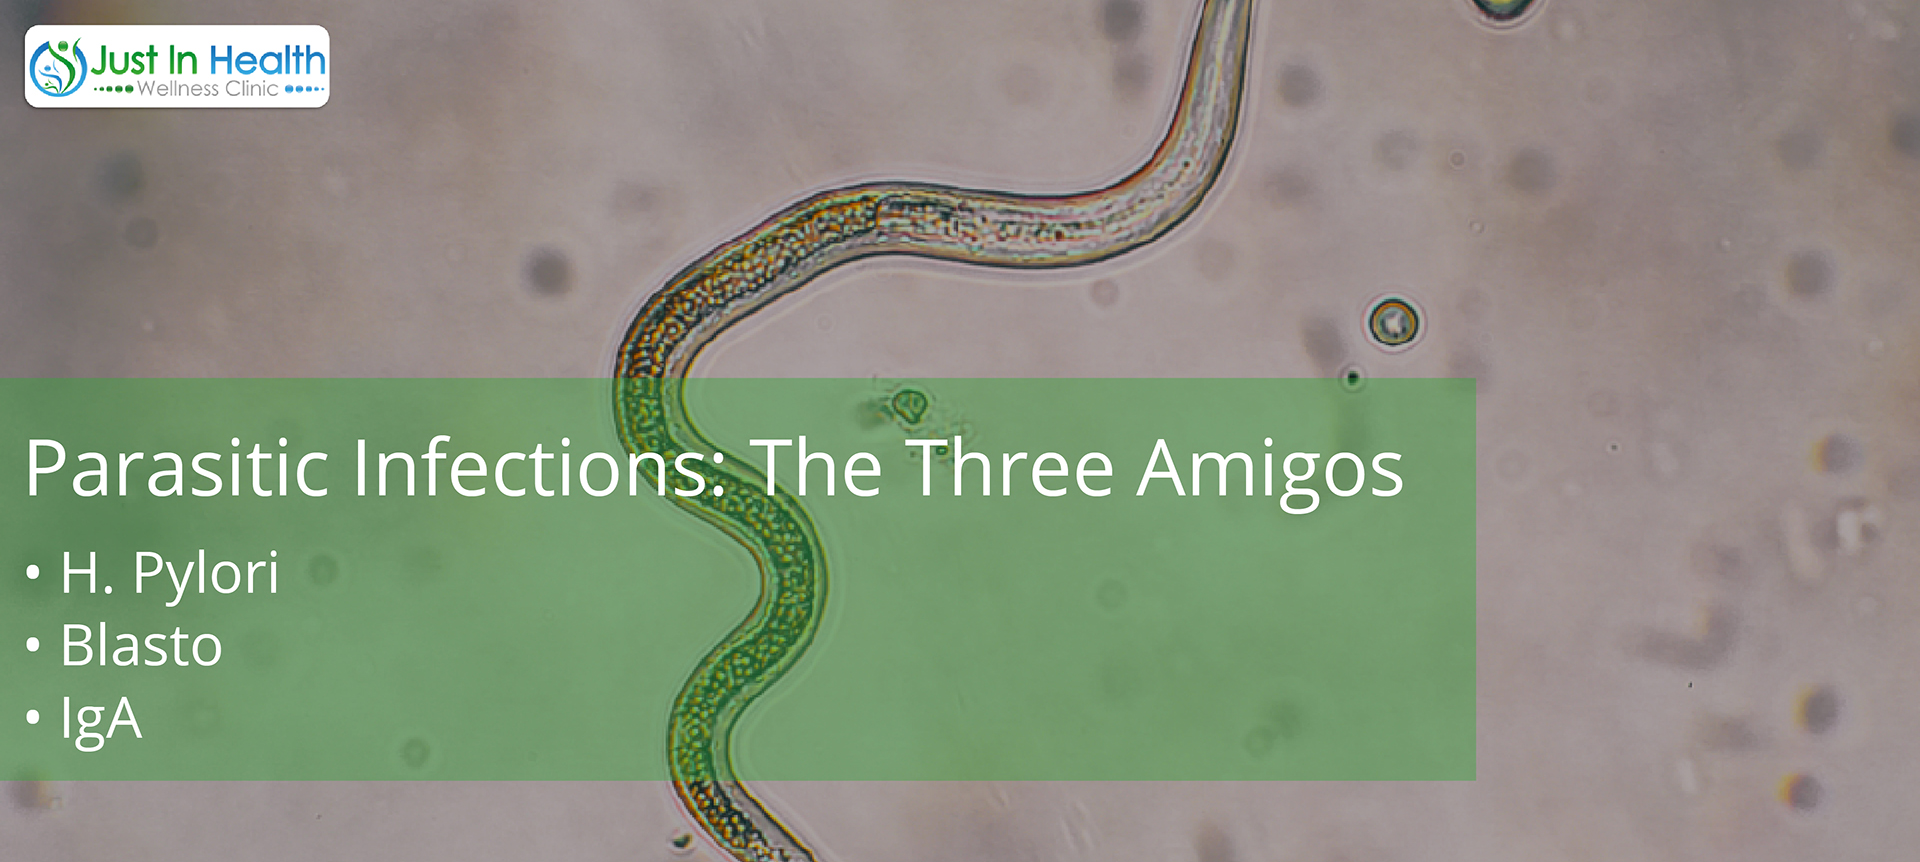 Parasitic Infections: The Three Amigos